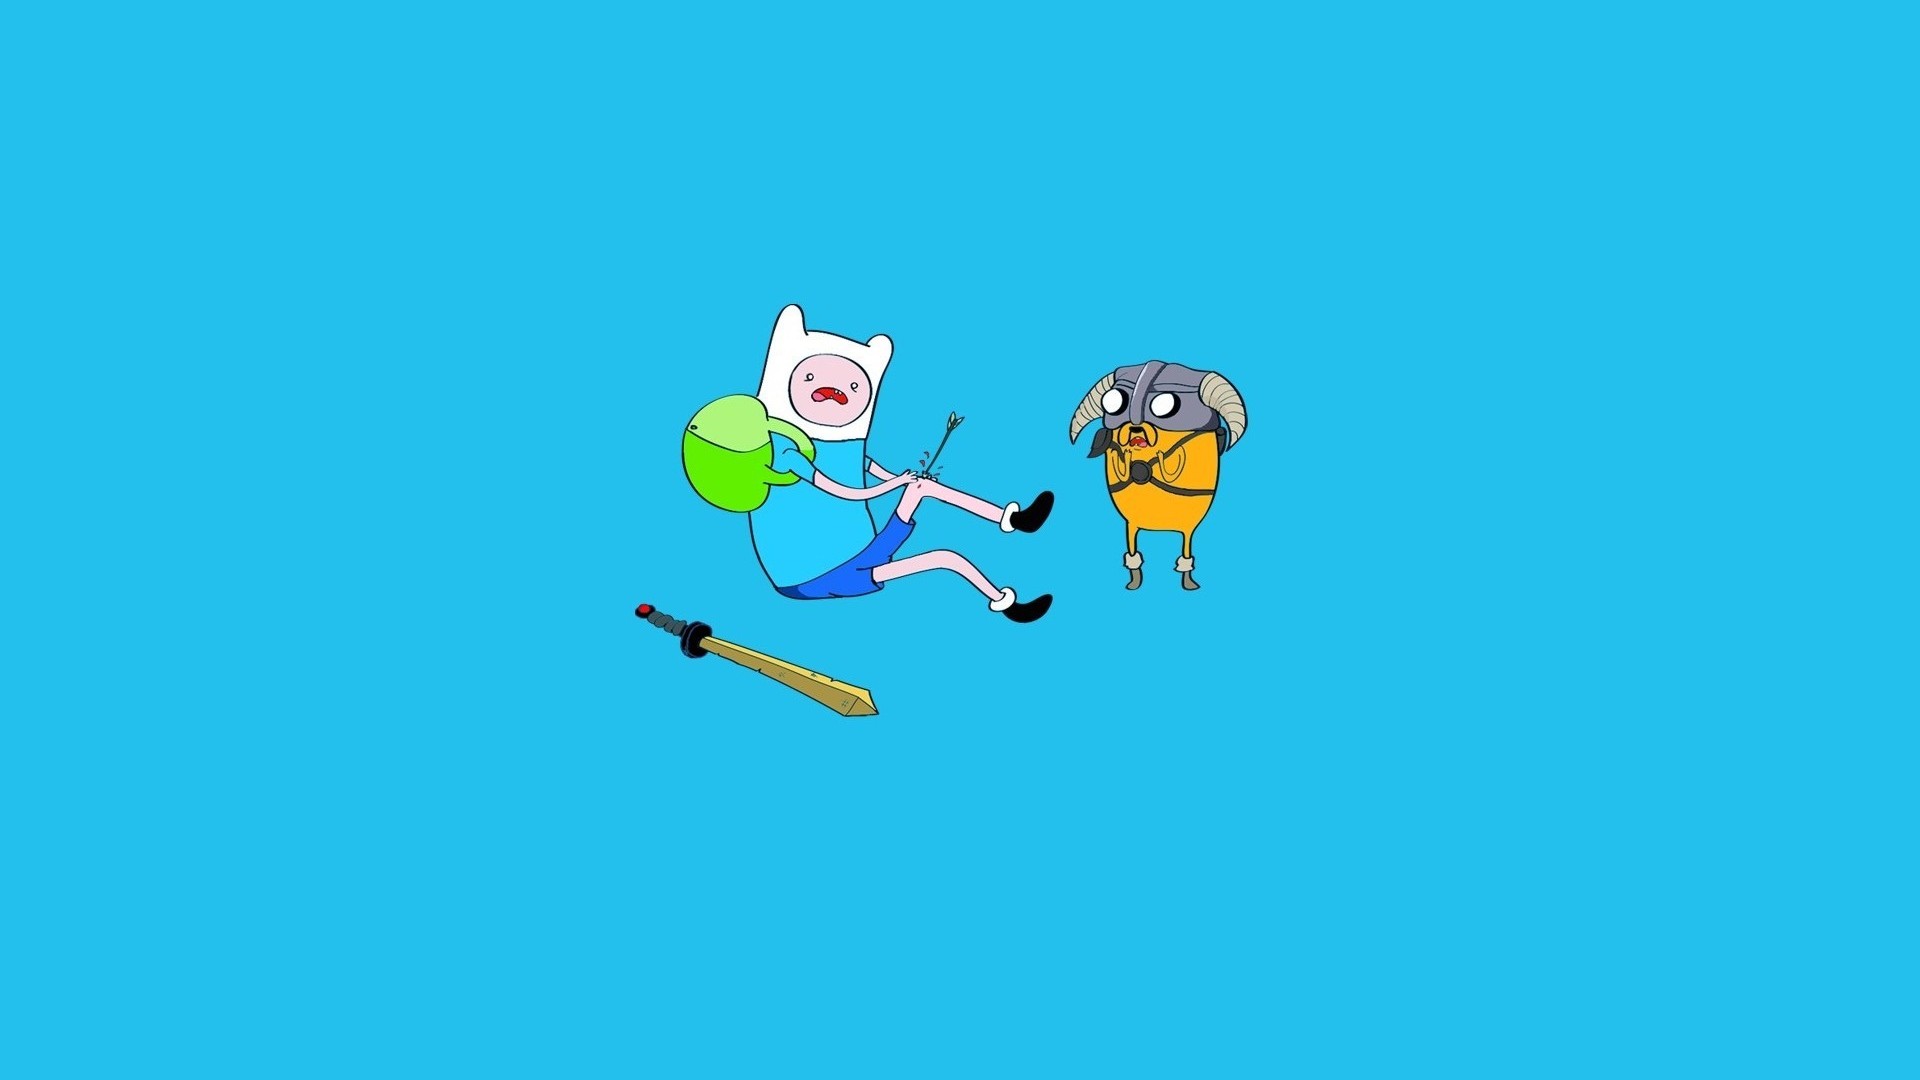 Adventure Time Full HD Wallpapers Wallpaper High Definition High